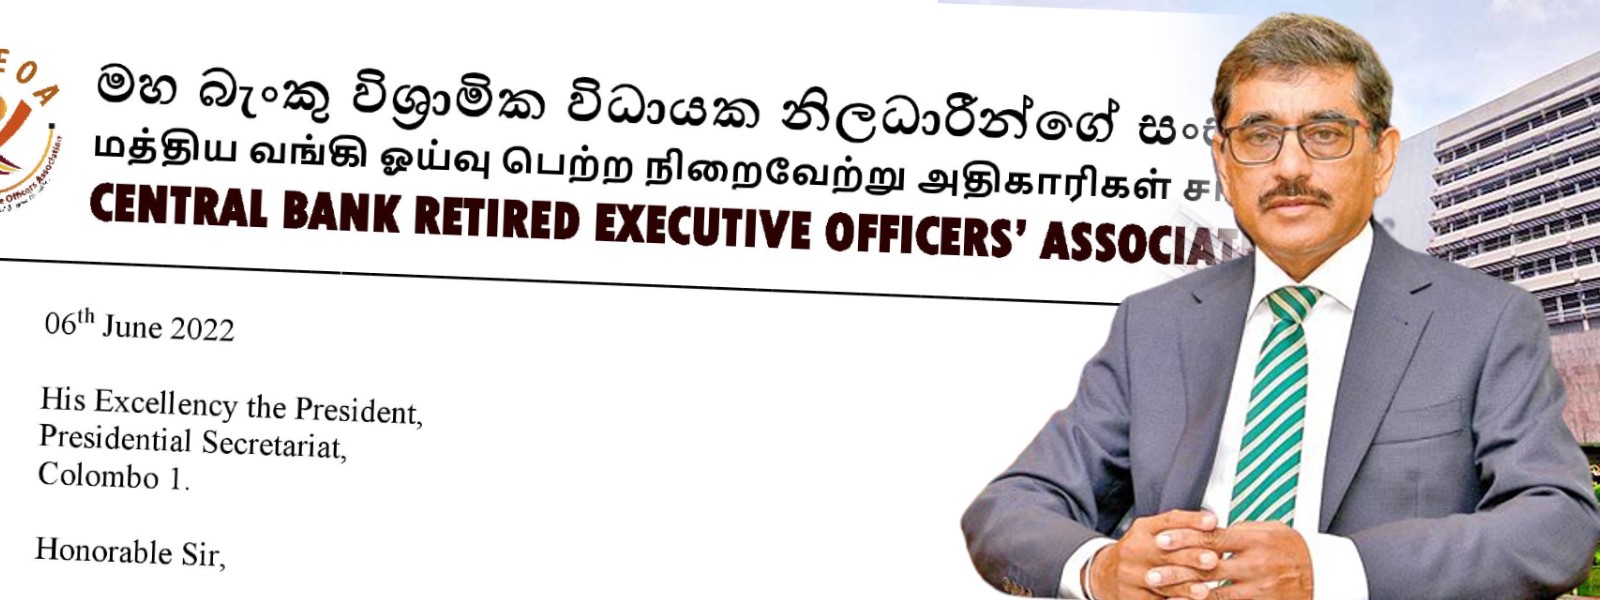 Stop attempts to remove CBSL Governor, CBSL Retired Executive Officer’s write to President